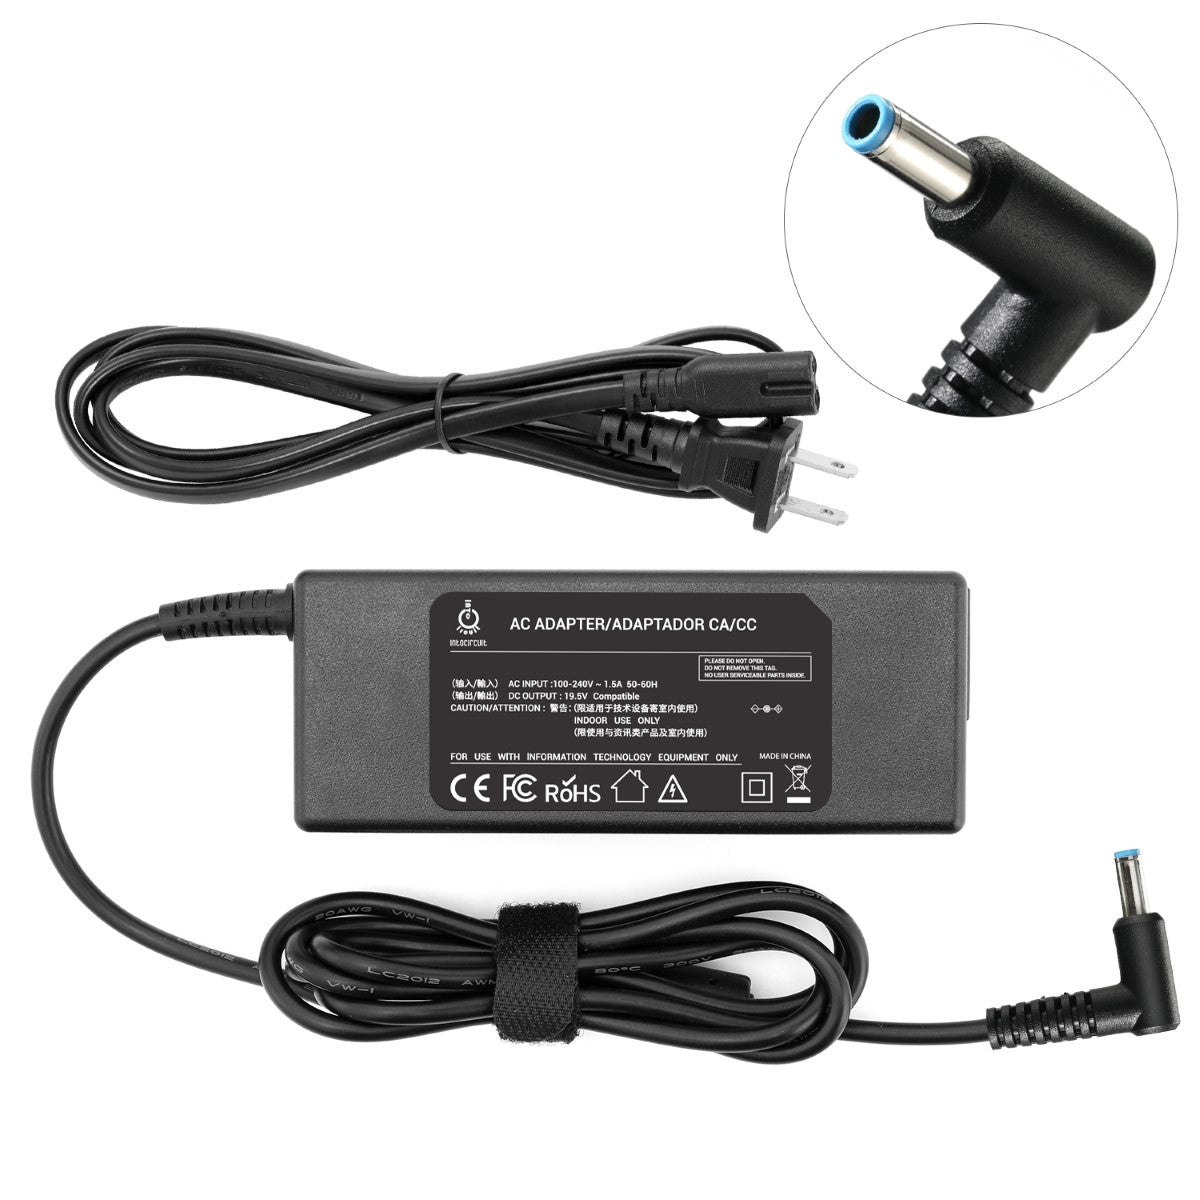 Charger for HP 15-df0033dx Spectre x360 Laptop